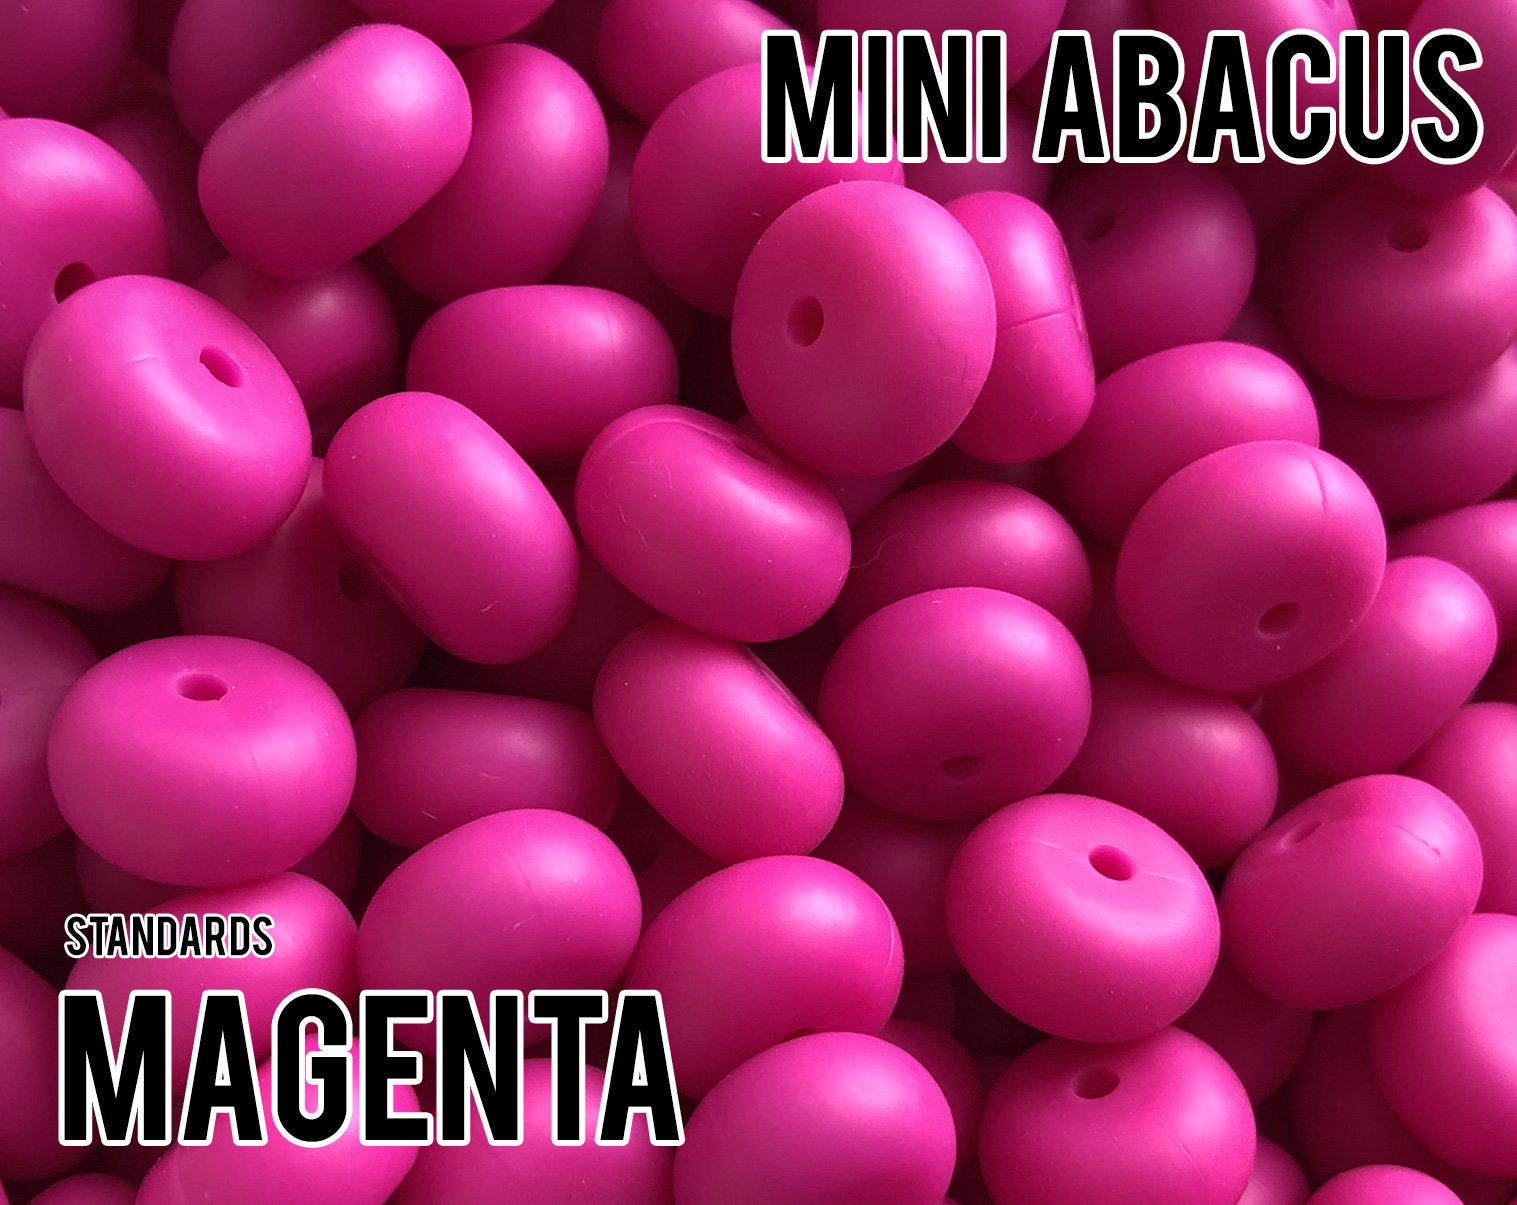 Mini Abacus Magenta Silicone Beads 5-1,000 (aka Violet Red) Wholesale Silicone Beads